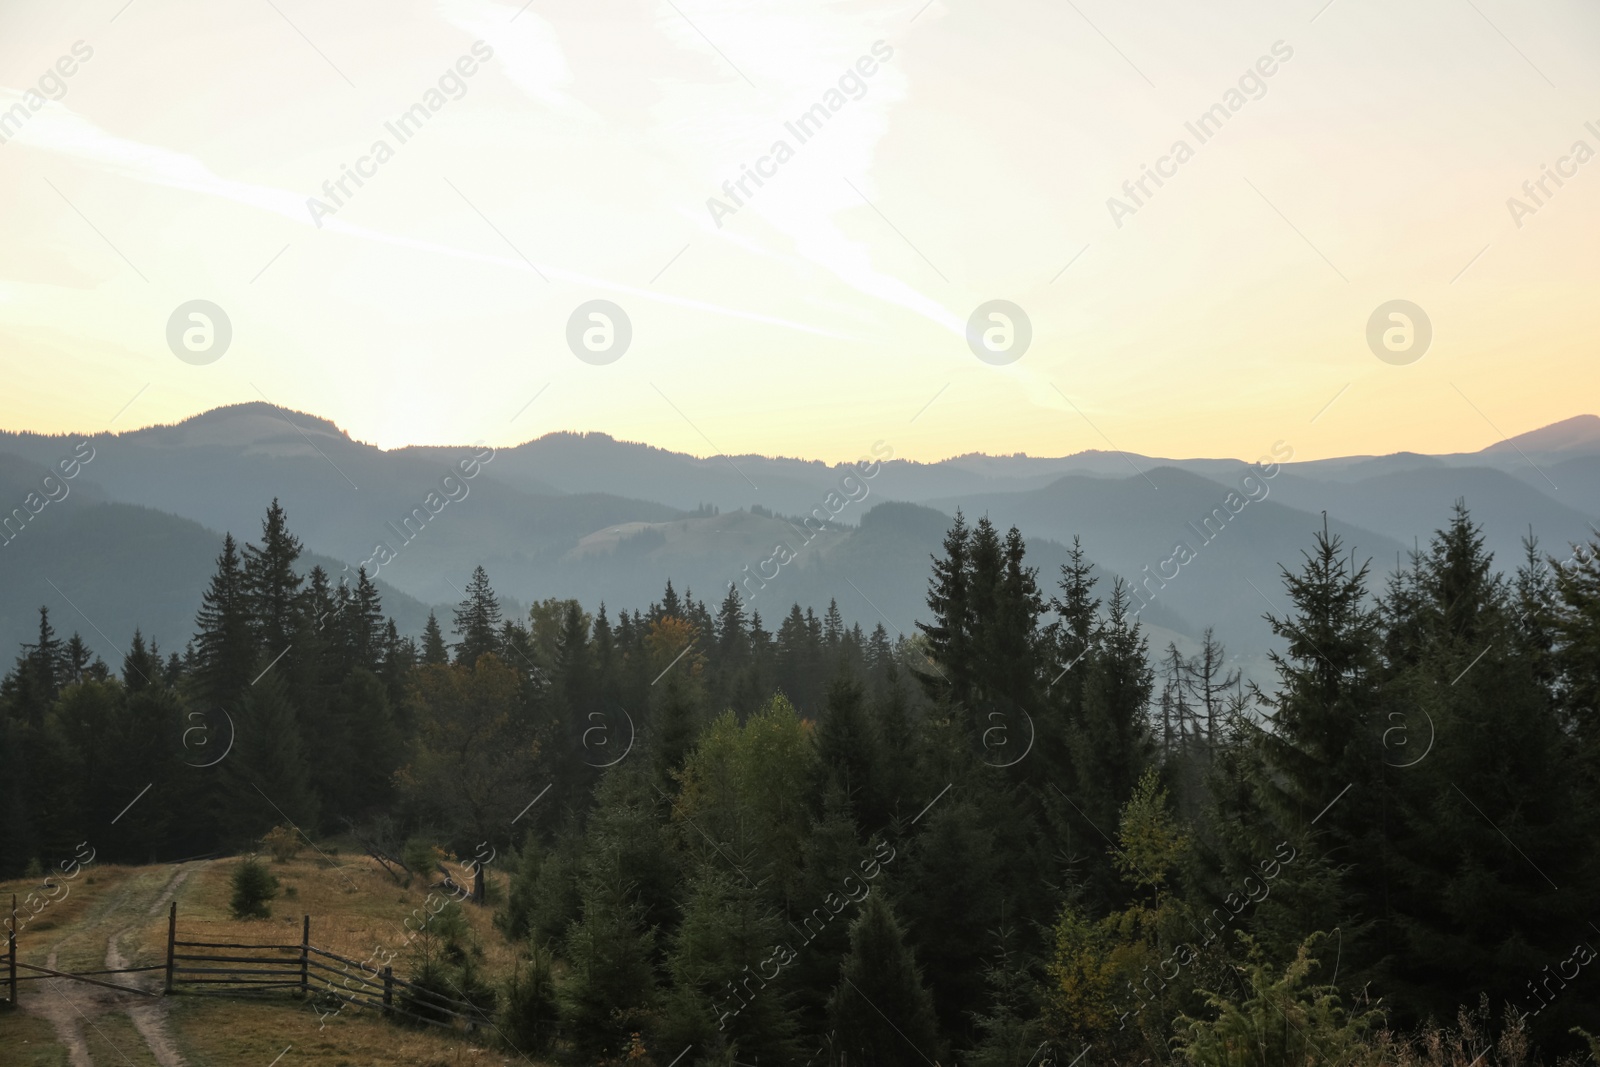 Photo of Picturesque view of mountain landscape with forest and wooden fence